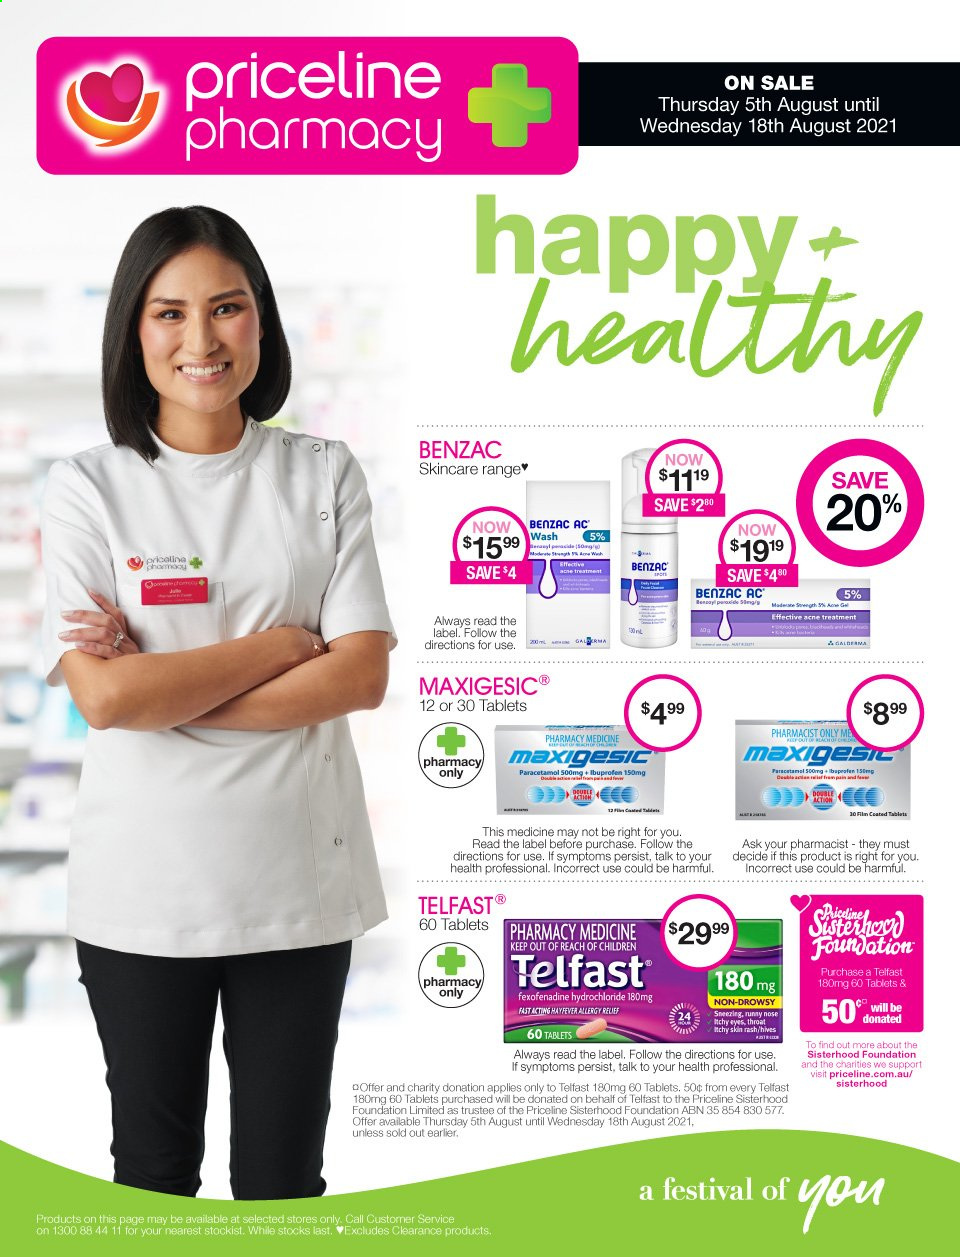 thumbnail - Priceline Pharmacy Catalogue - 5 Aug 2021 - 18 Aug 2021 - Sales products - Ibuprofen, allergy relief, Telfast. Page 1.